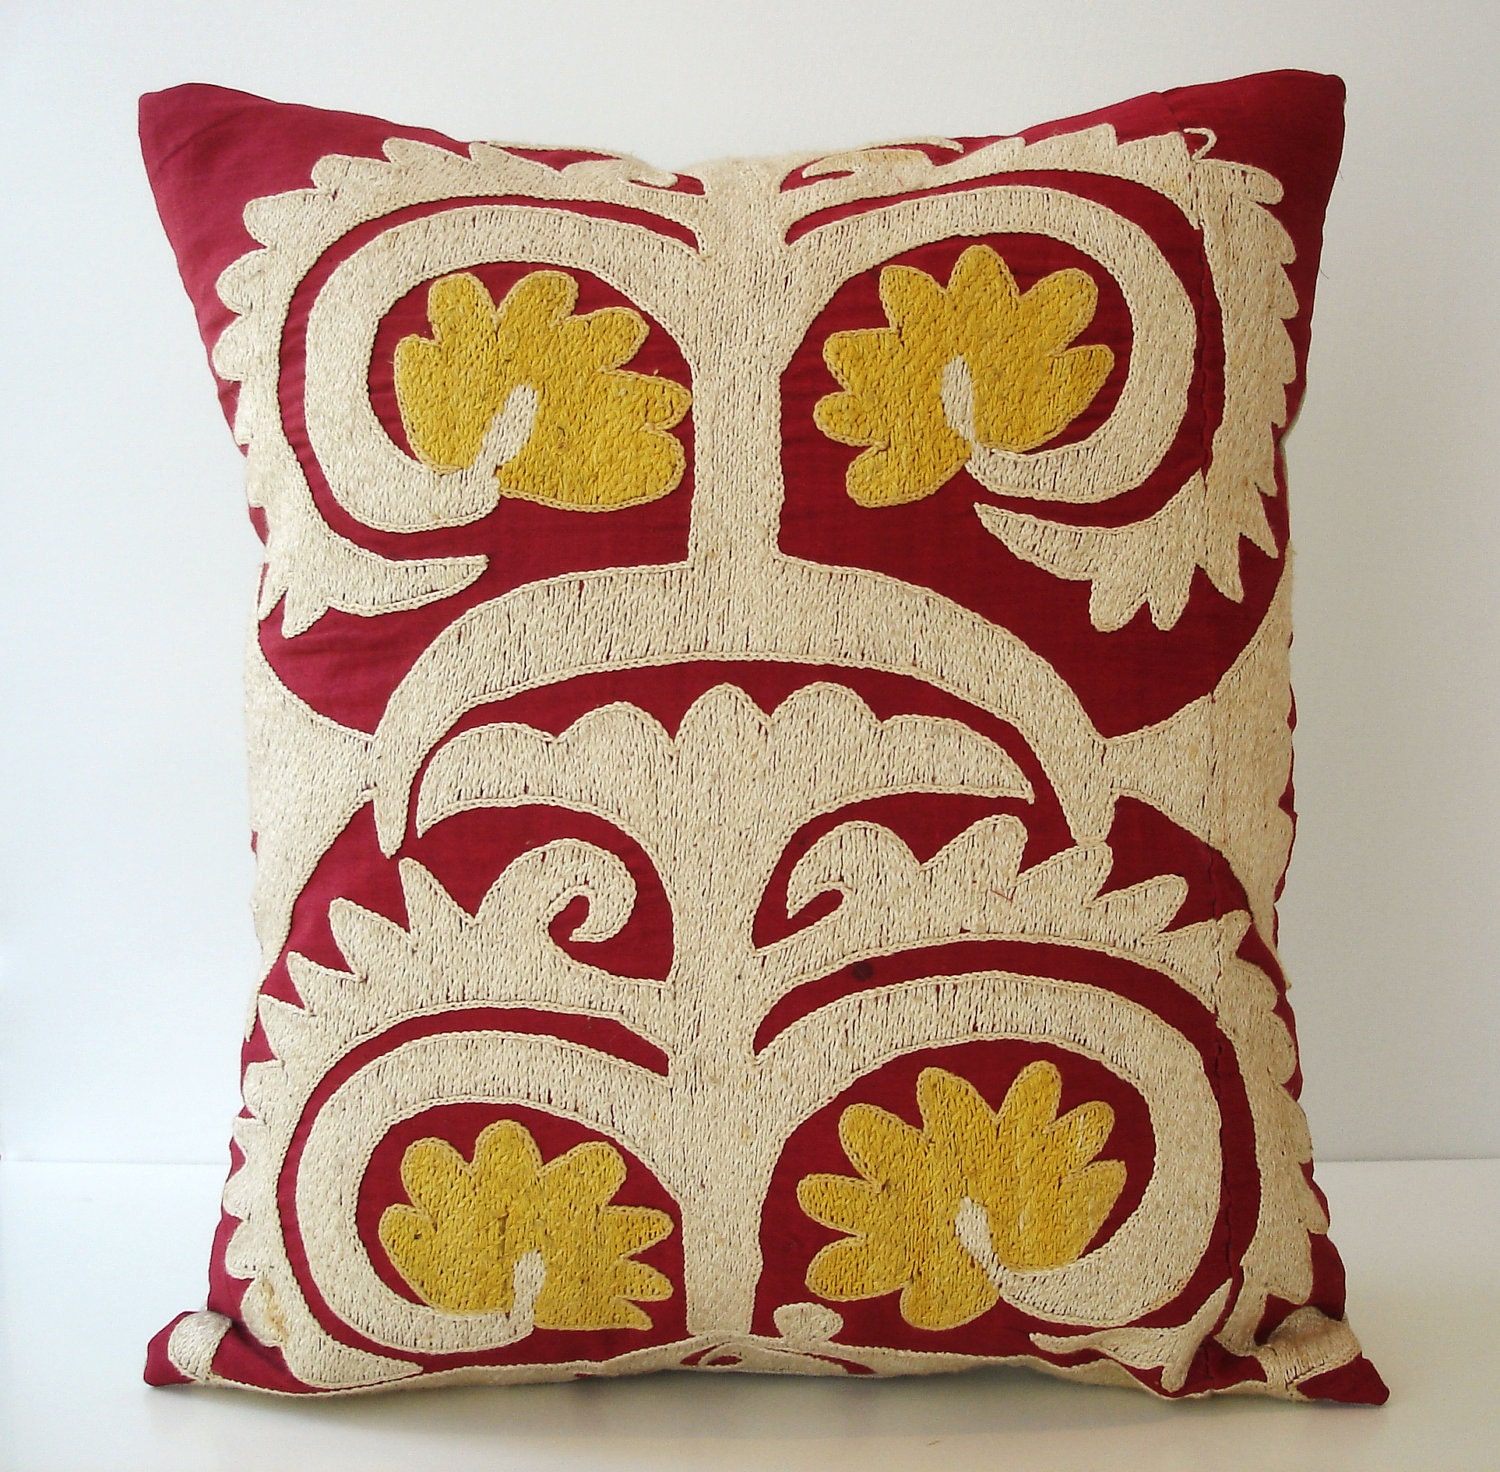 Sukan / Vintage Hand Embroidered Suzani Pillow Cover - 15x17